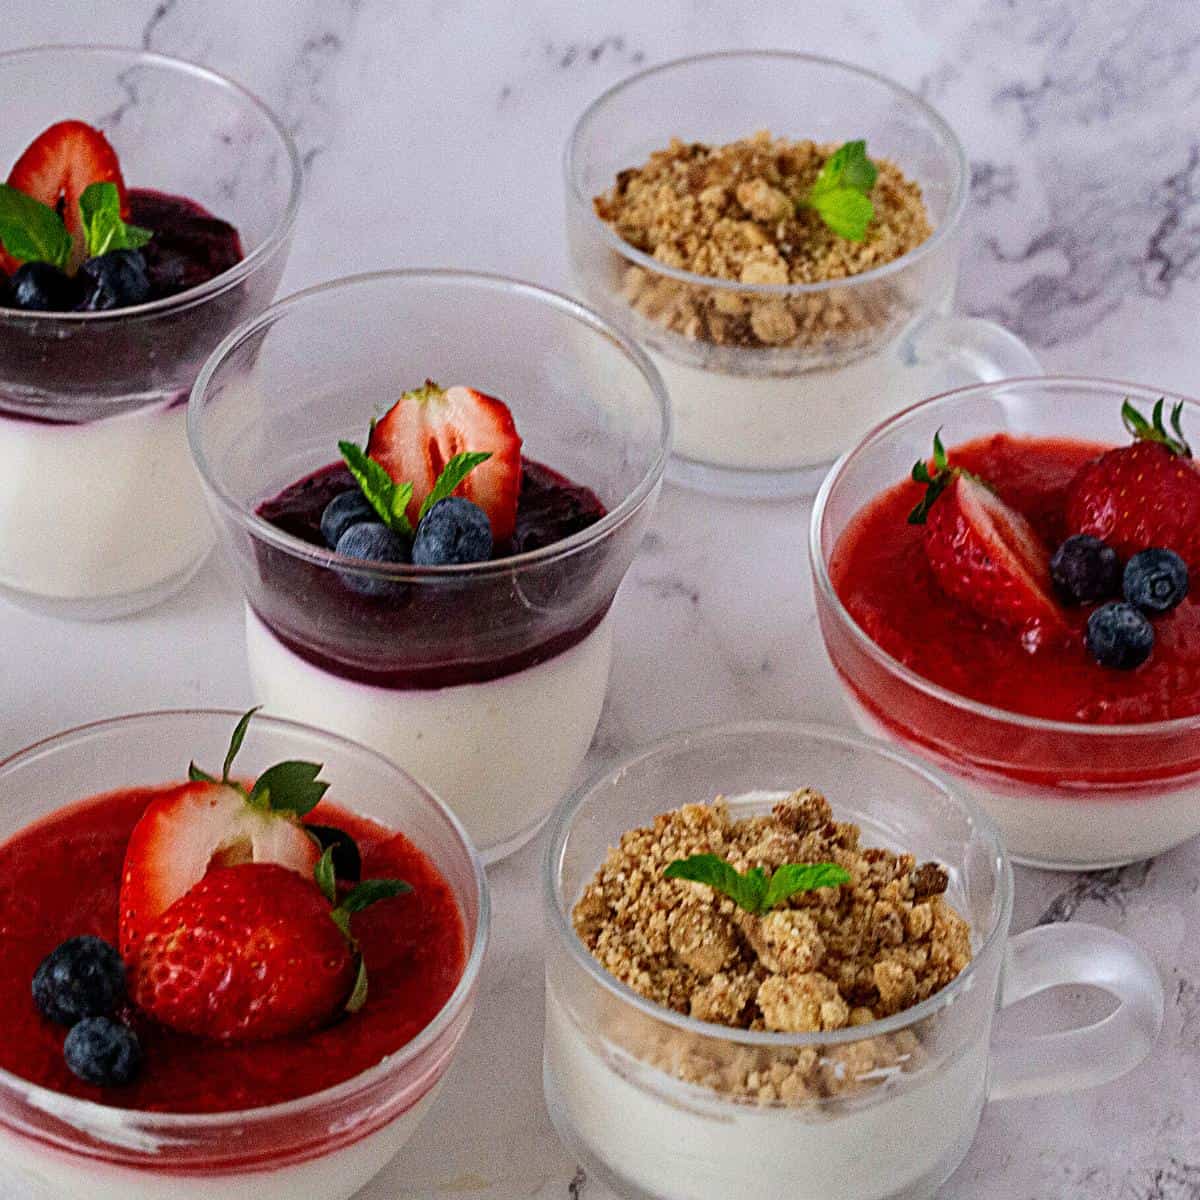 Bowls of cheesecake with toppings.